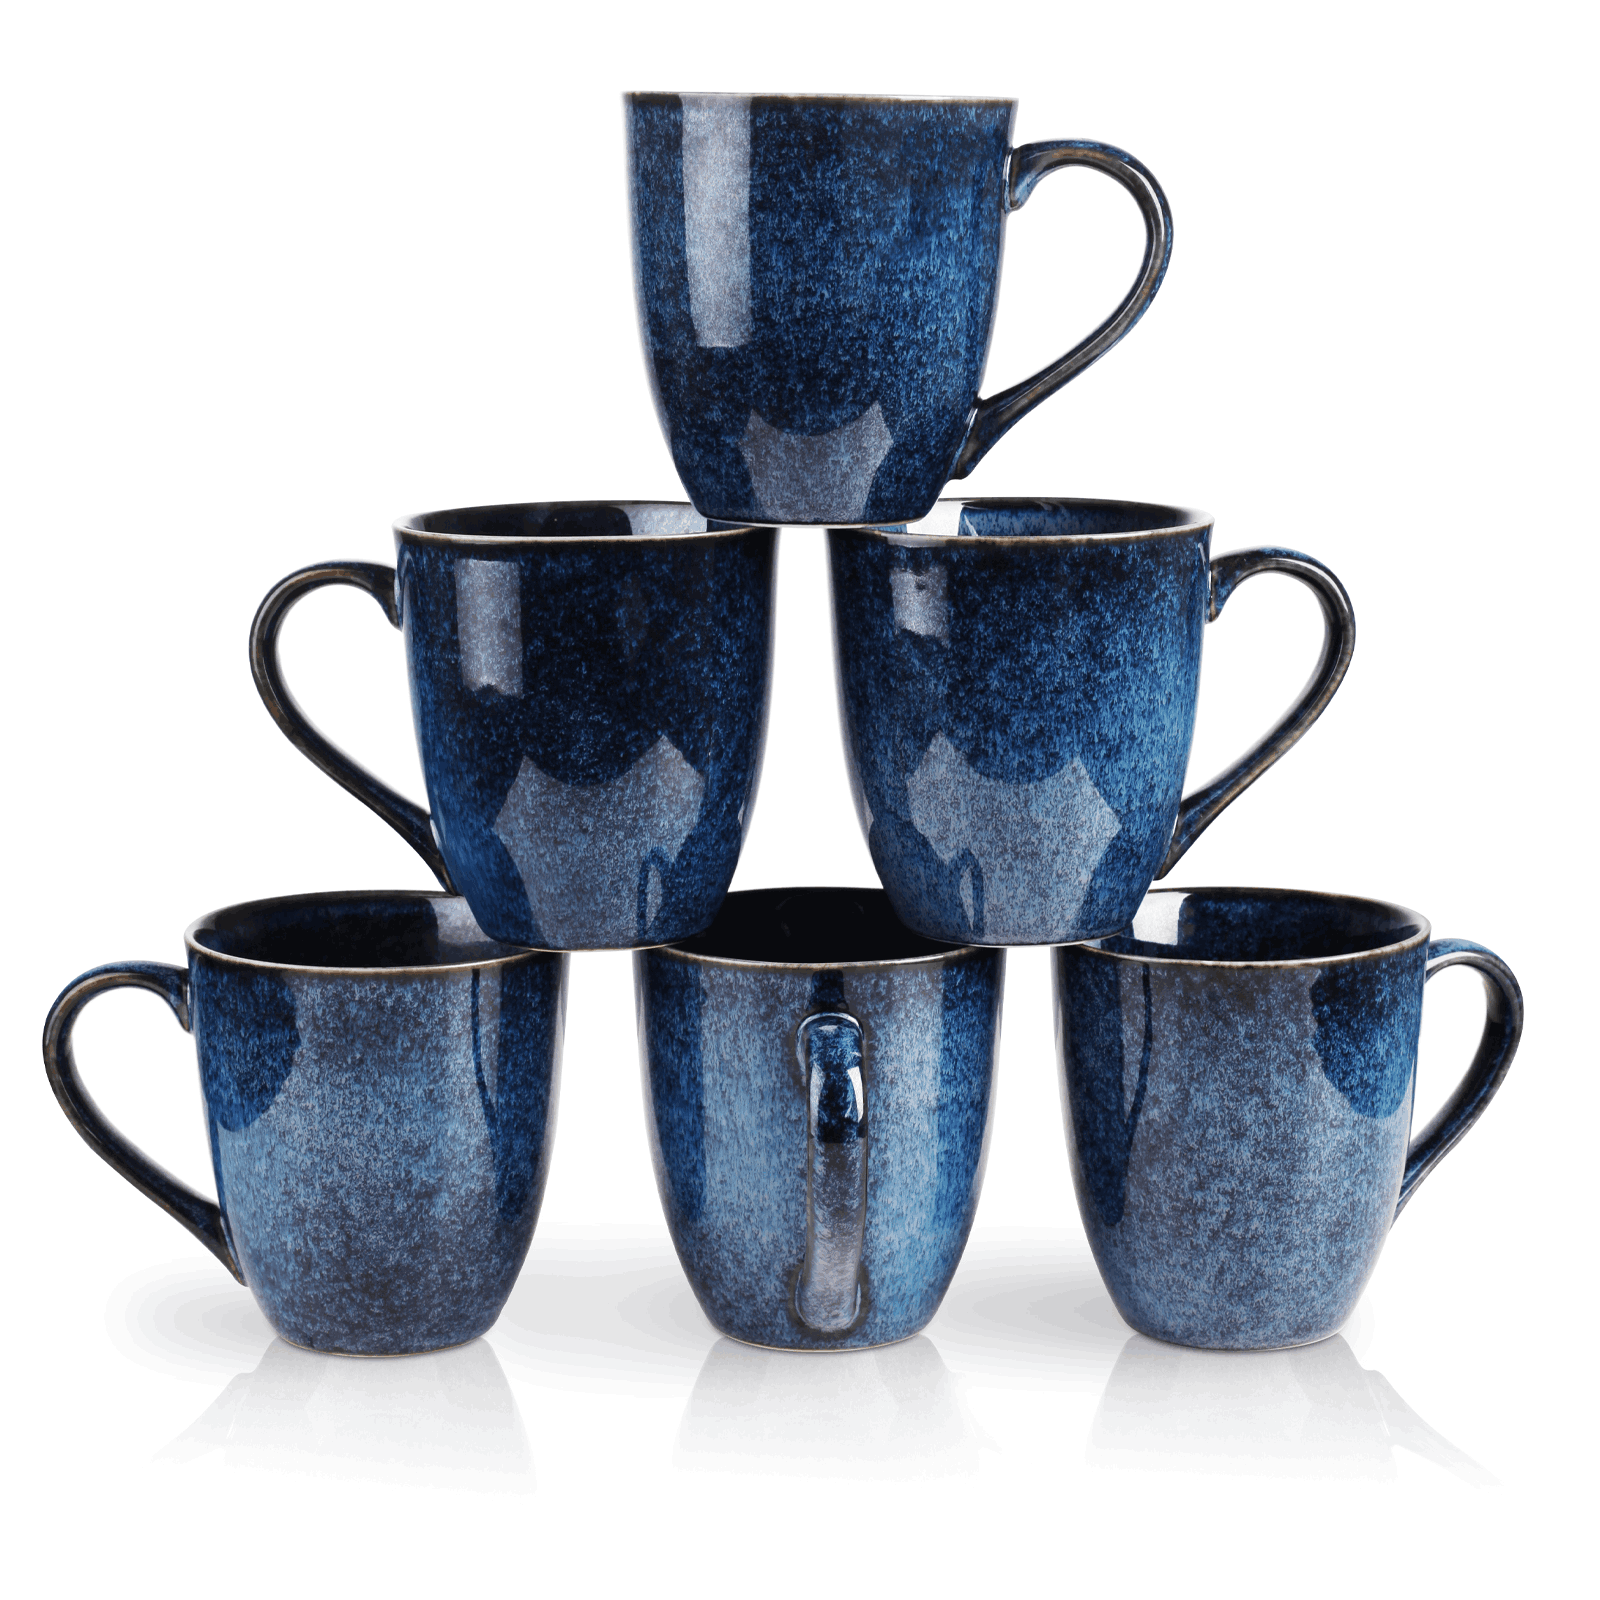 Starry Blue 6.5 oz Cappuccino Cups with Saucers, Set of 4, Ceramic Coffee  Cup for Au Lait, Double shot, Latte, Cafe Mocha, Tea, Starry Blue - Vicrays  Ceramics